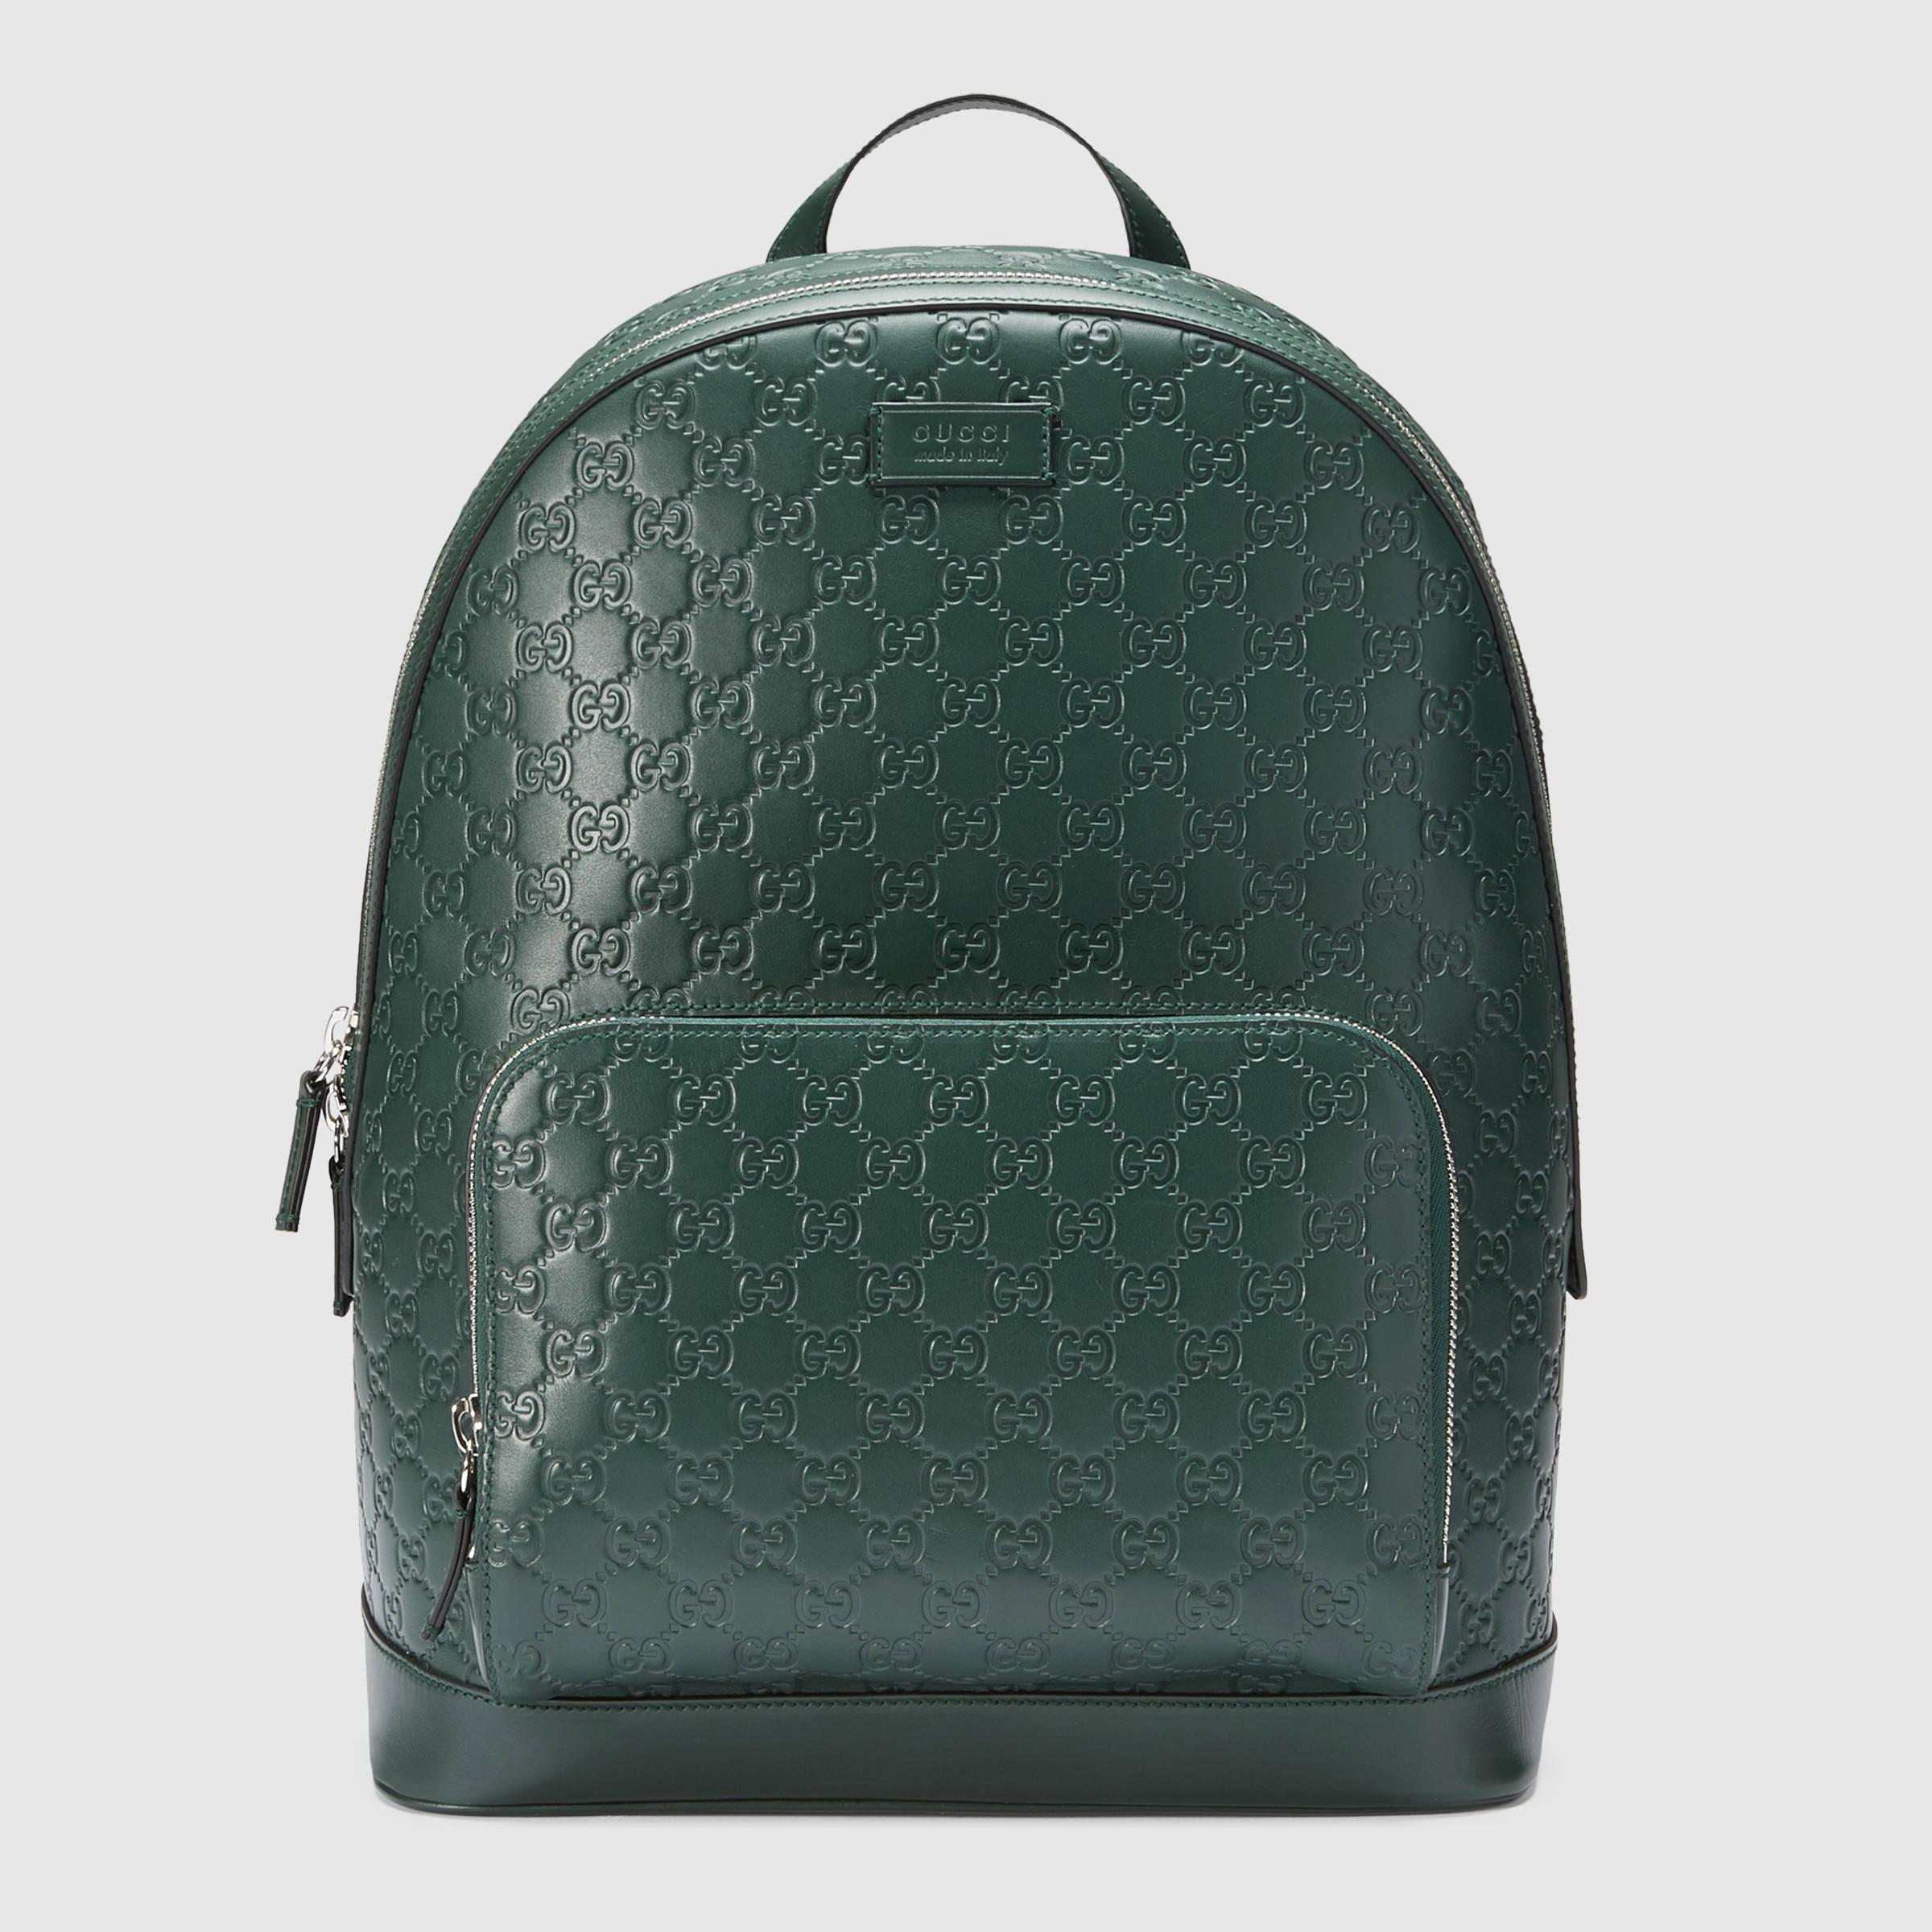 Gucci Signature Leather Backpack in 